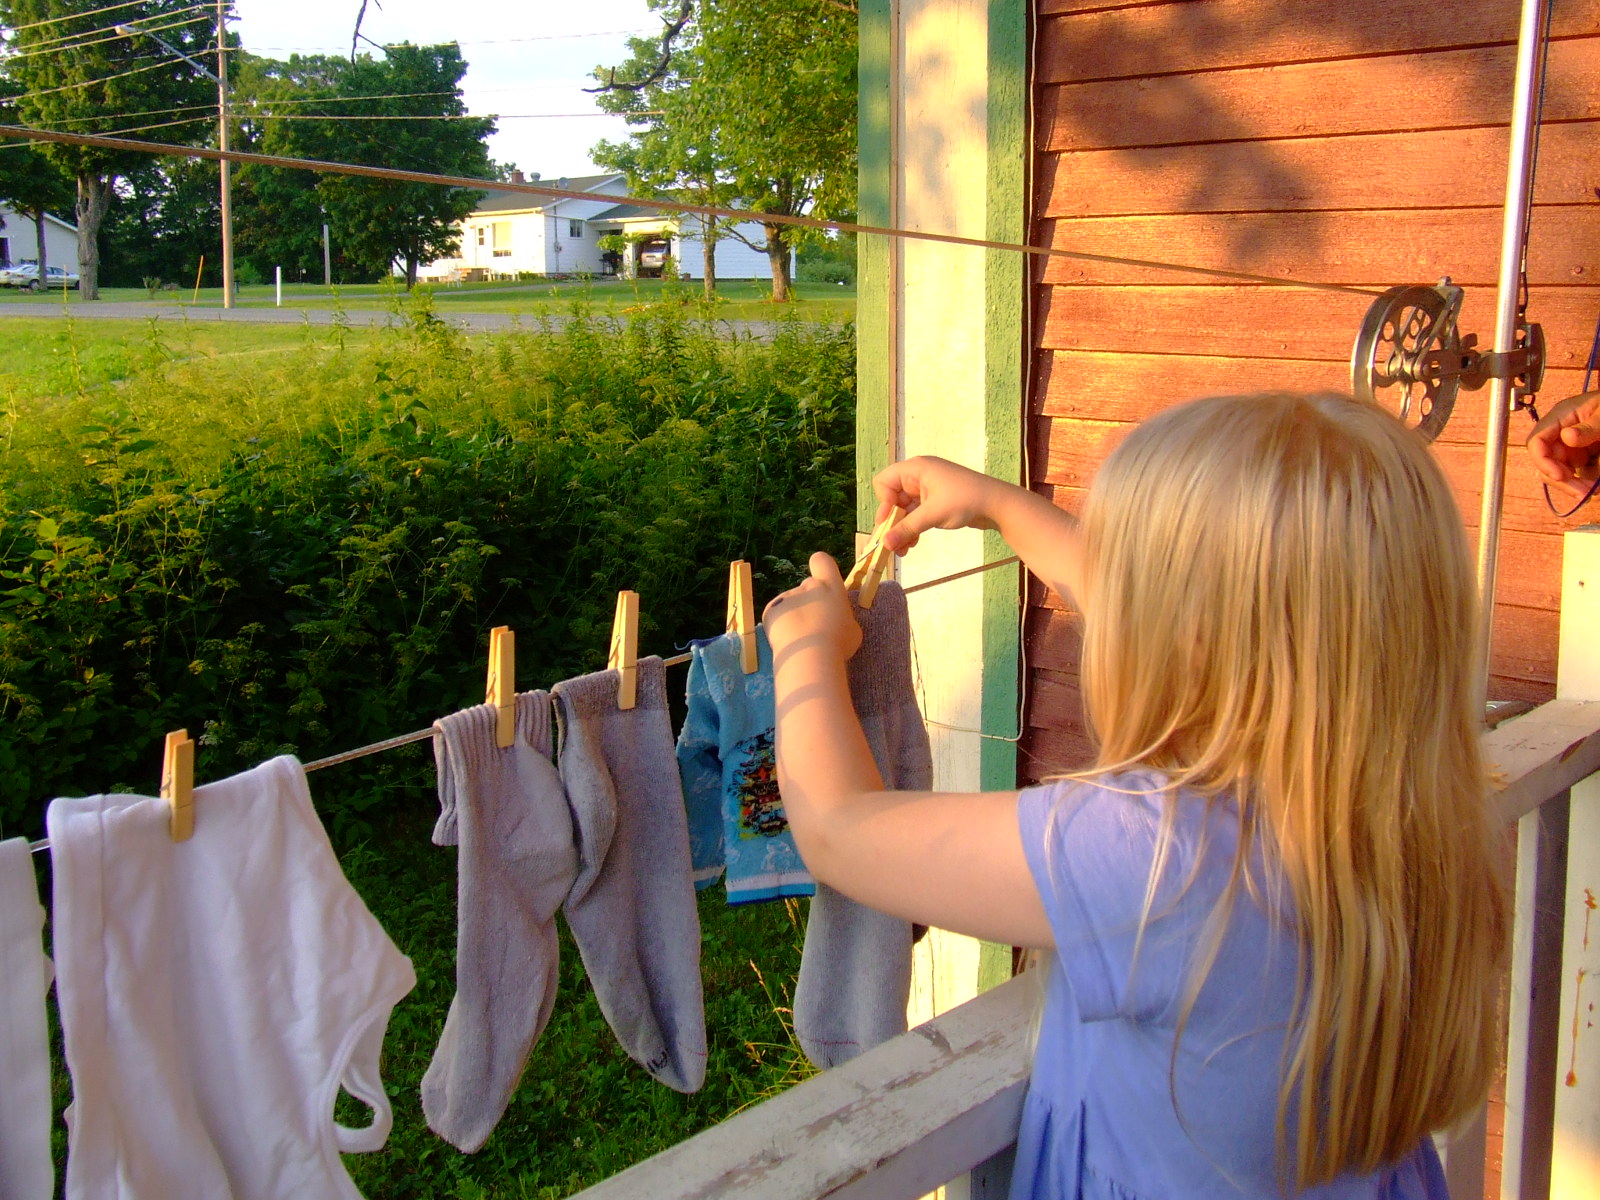 Clothes Hanging To Dry on Clothesline Outdoors Inside Yard of